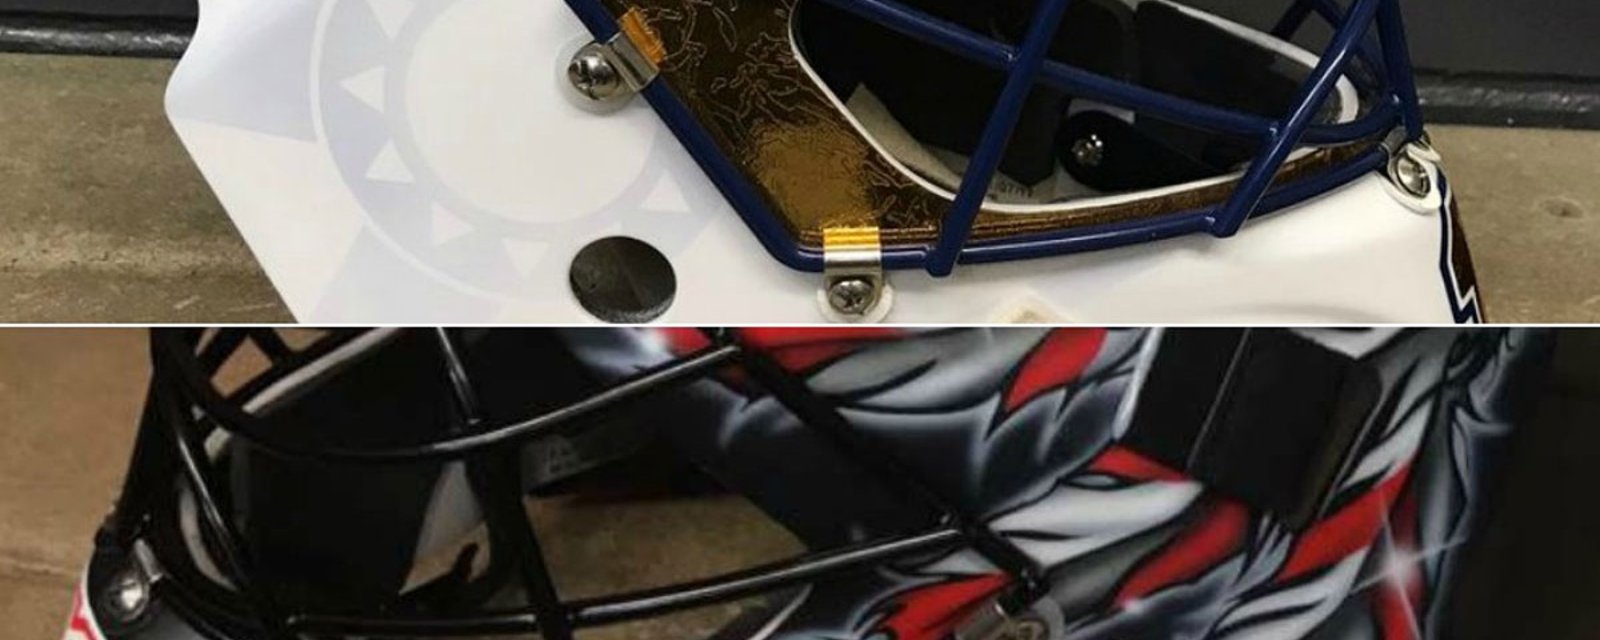 Must See: Two more NHL goalies unveil their stunning new masks!